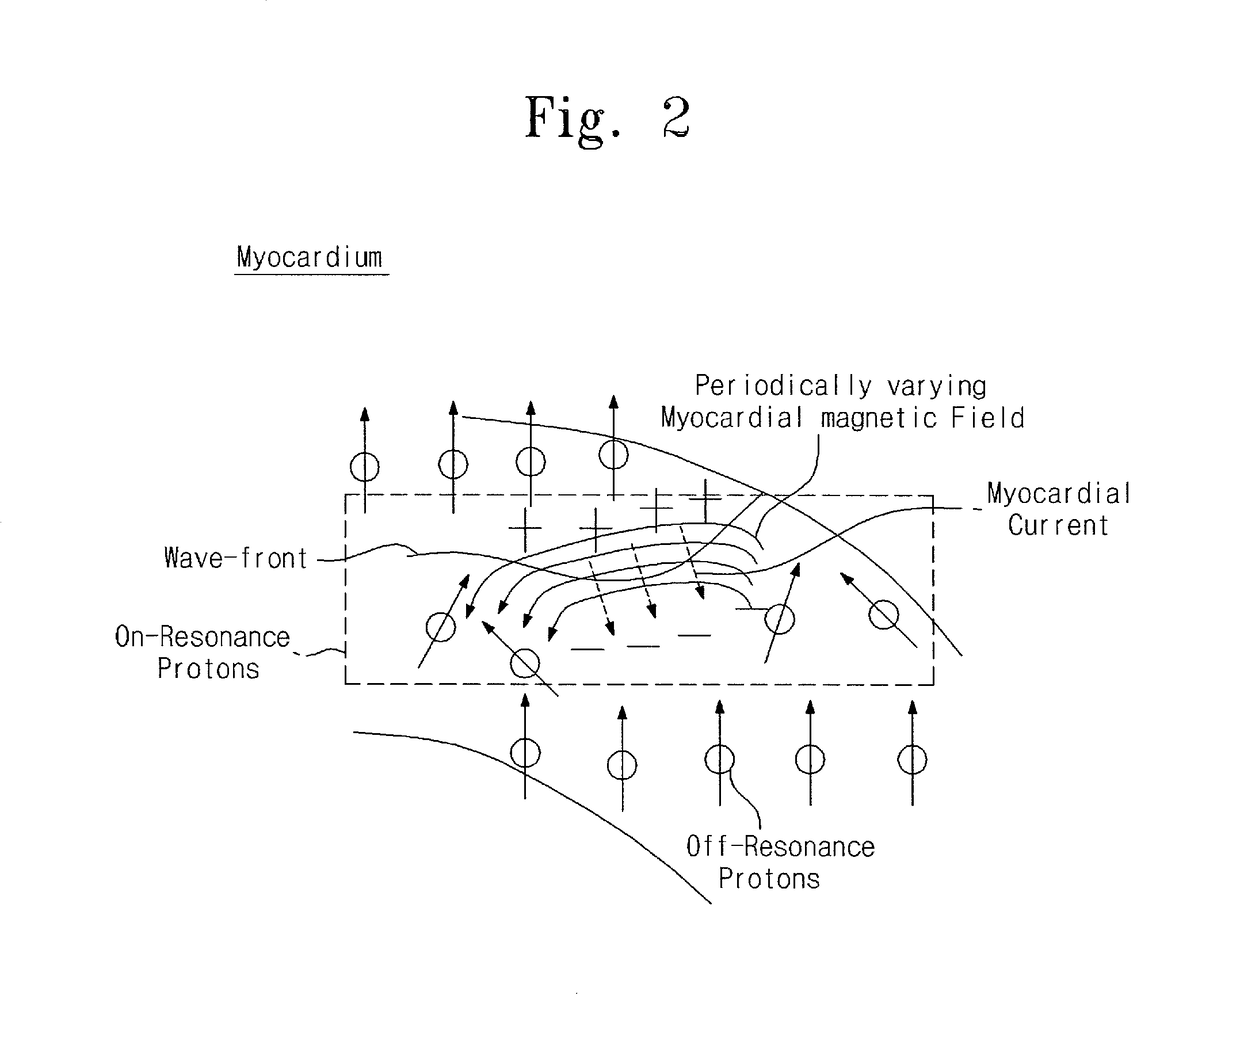 Ultra-low-field nuclear-magnetic-resonance direct myocardial electrical activity detection method and ultra-low-field nuclear-magnetic-resonance device